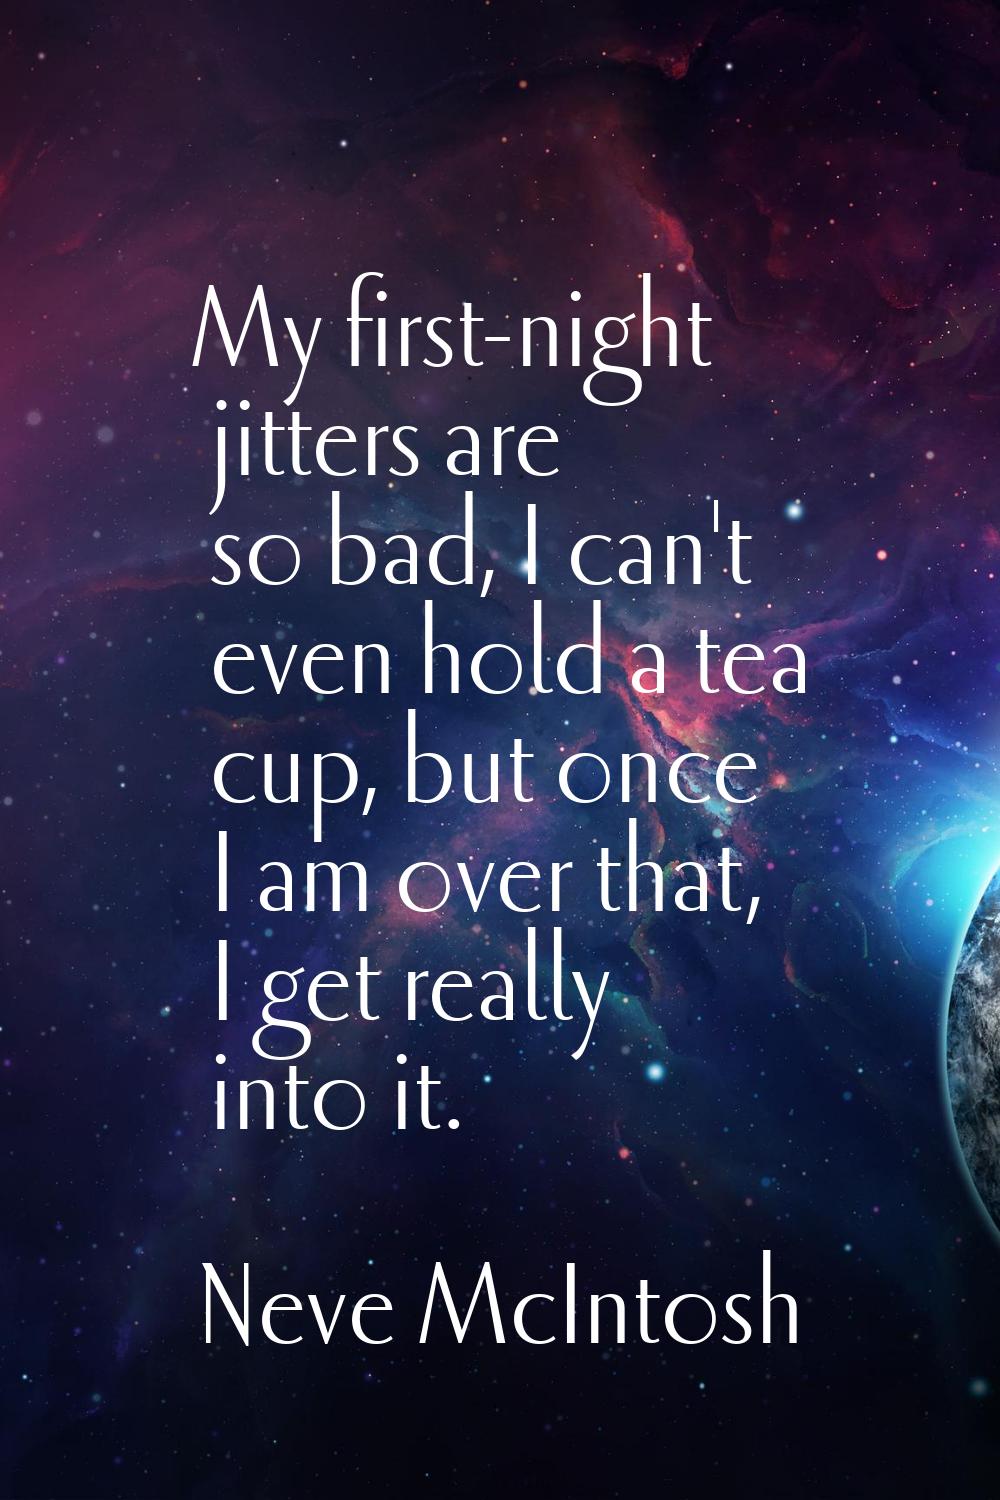 My first-night jitters are so bad, I can't even hold a tea cup, but once I am over that, I get real